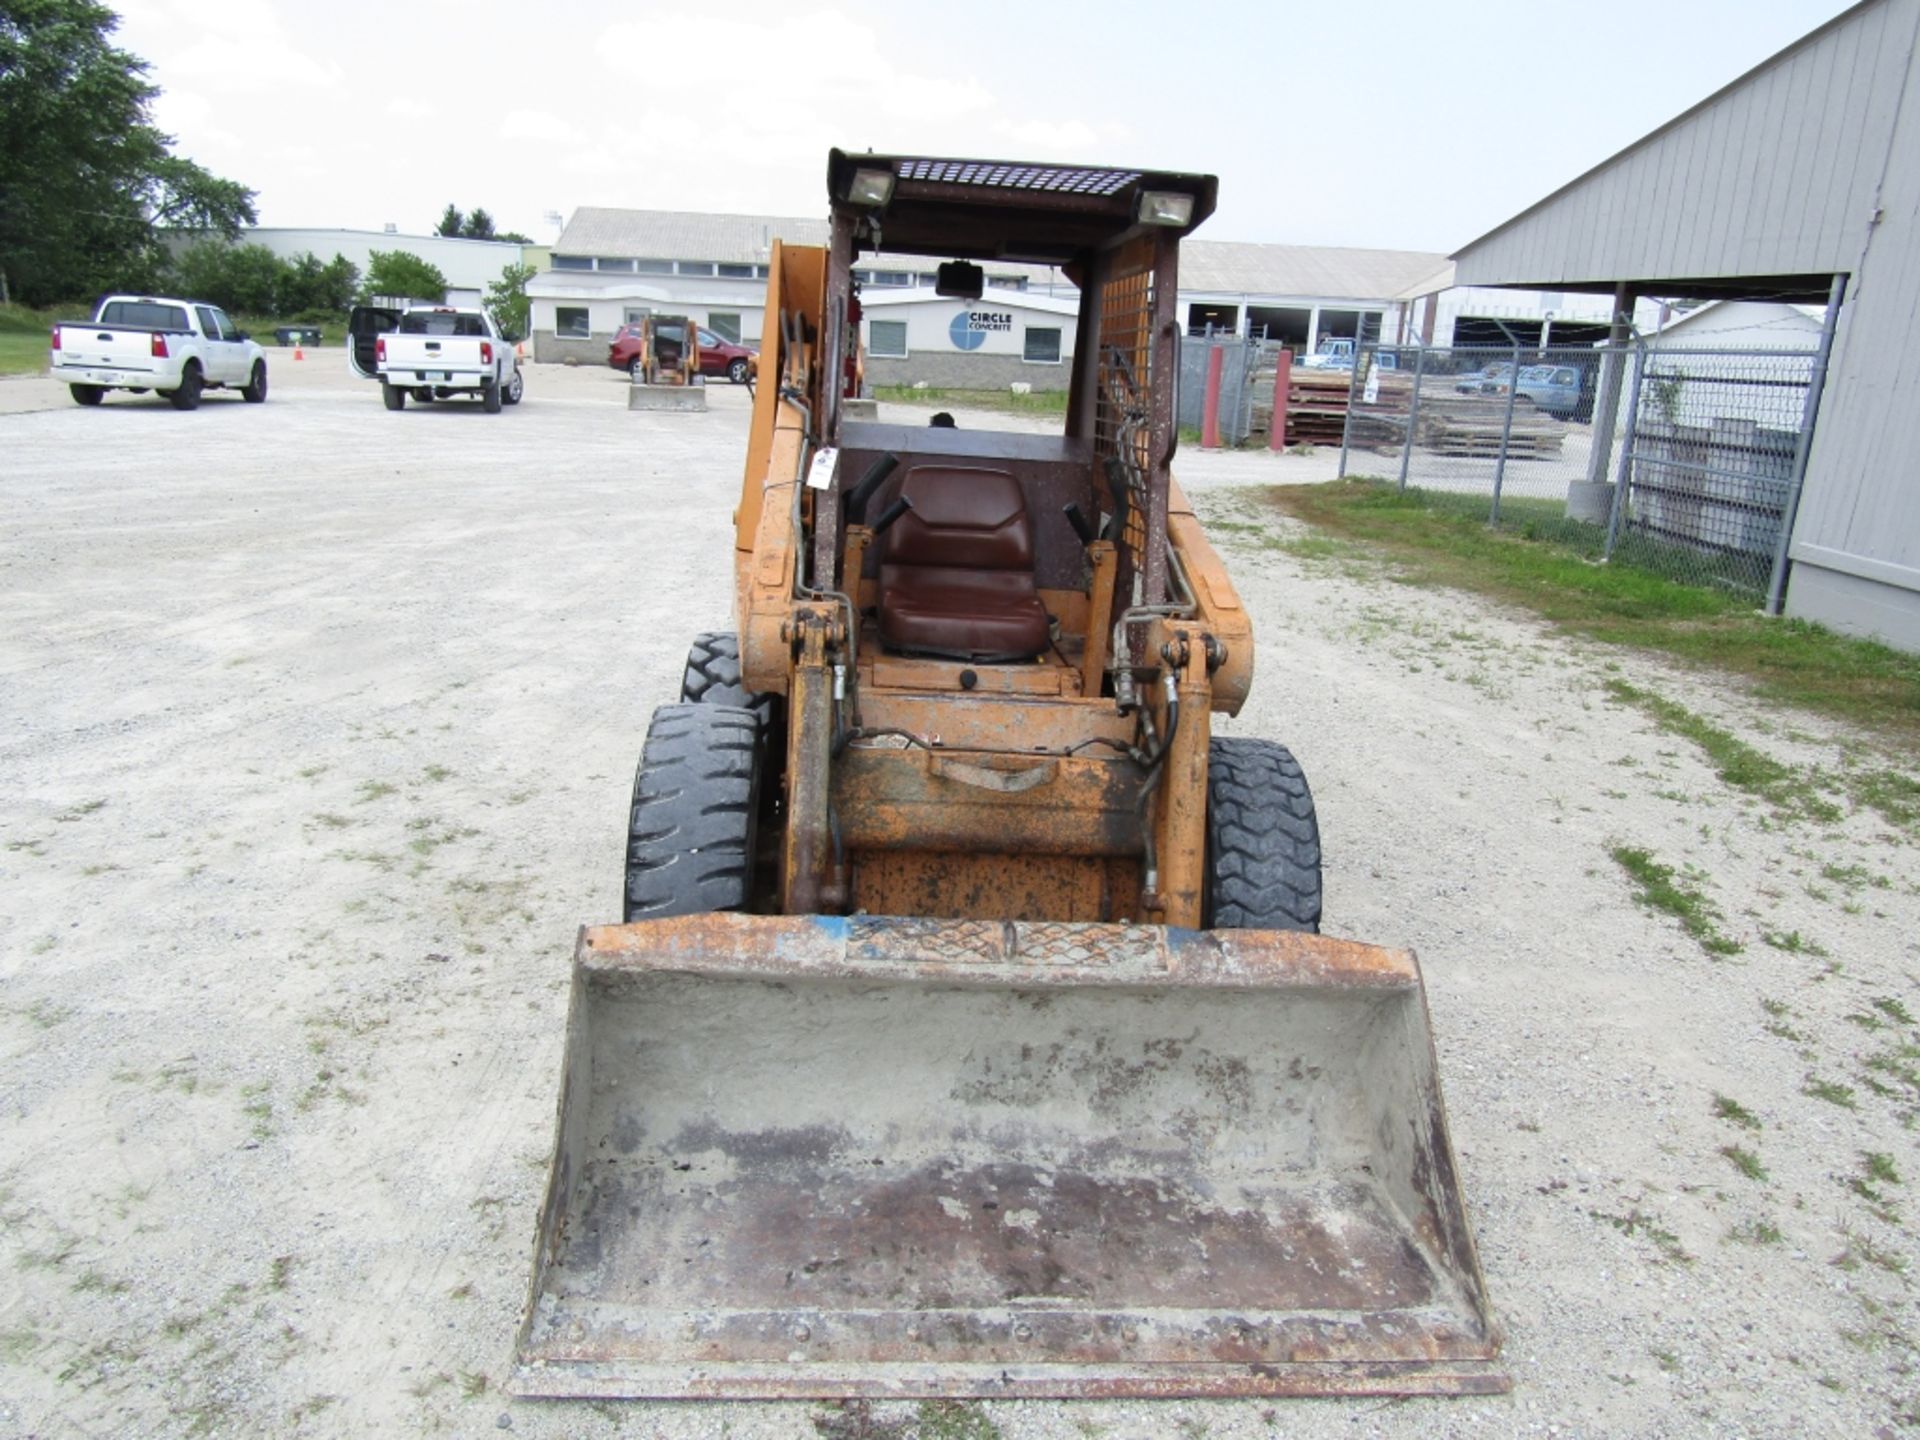 1991 Case 1840 Uni-loader with Bucket, 3291 Hours, ID #JAF0046173 - Image 2 of 12